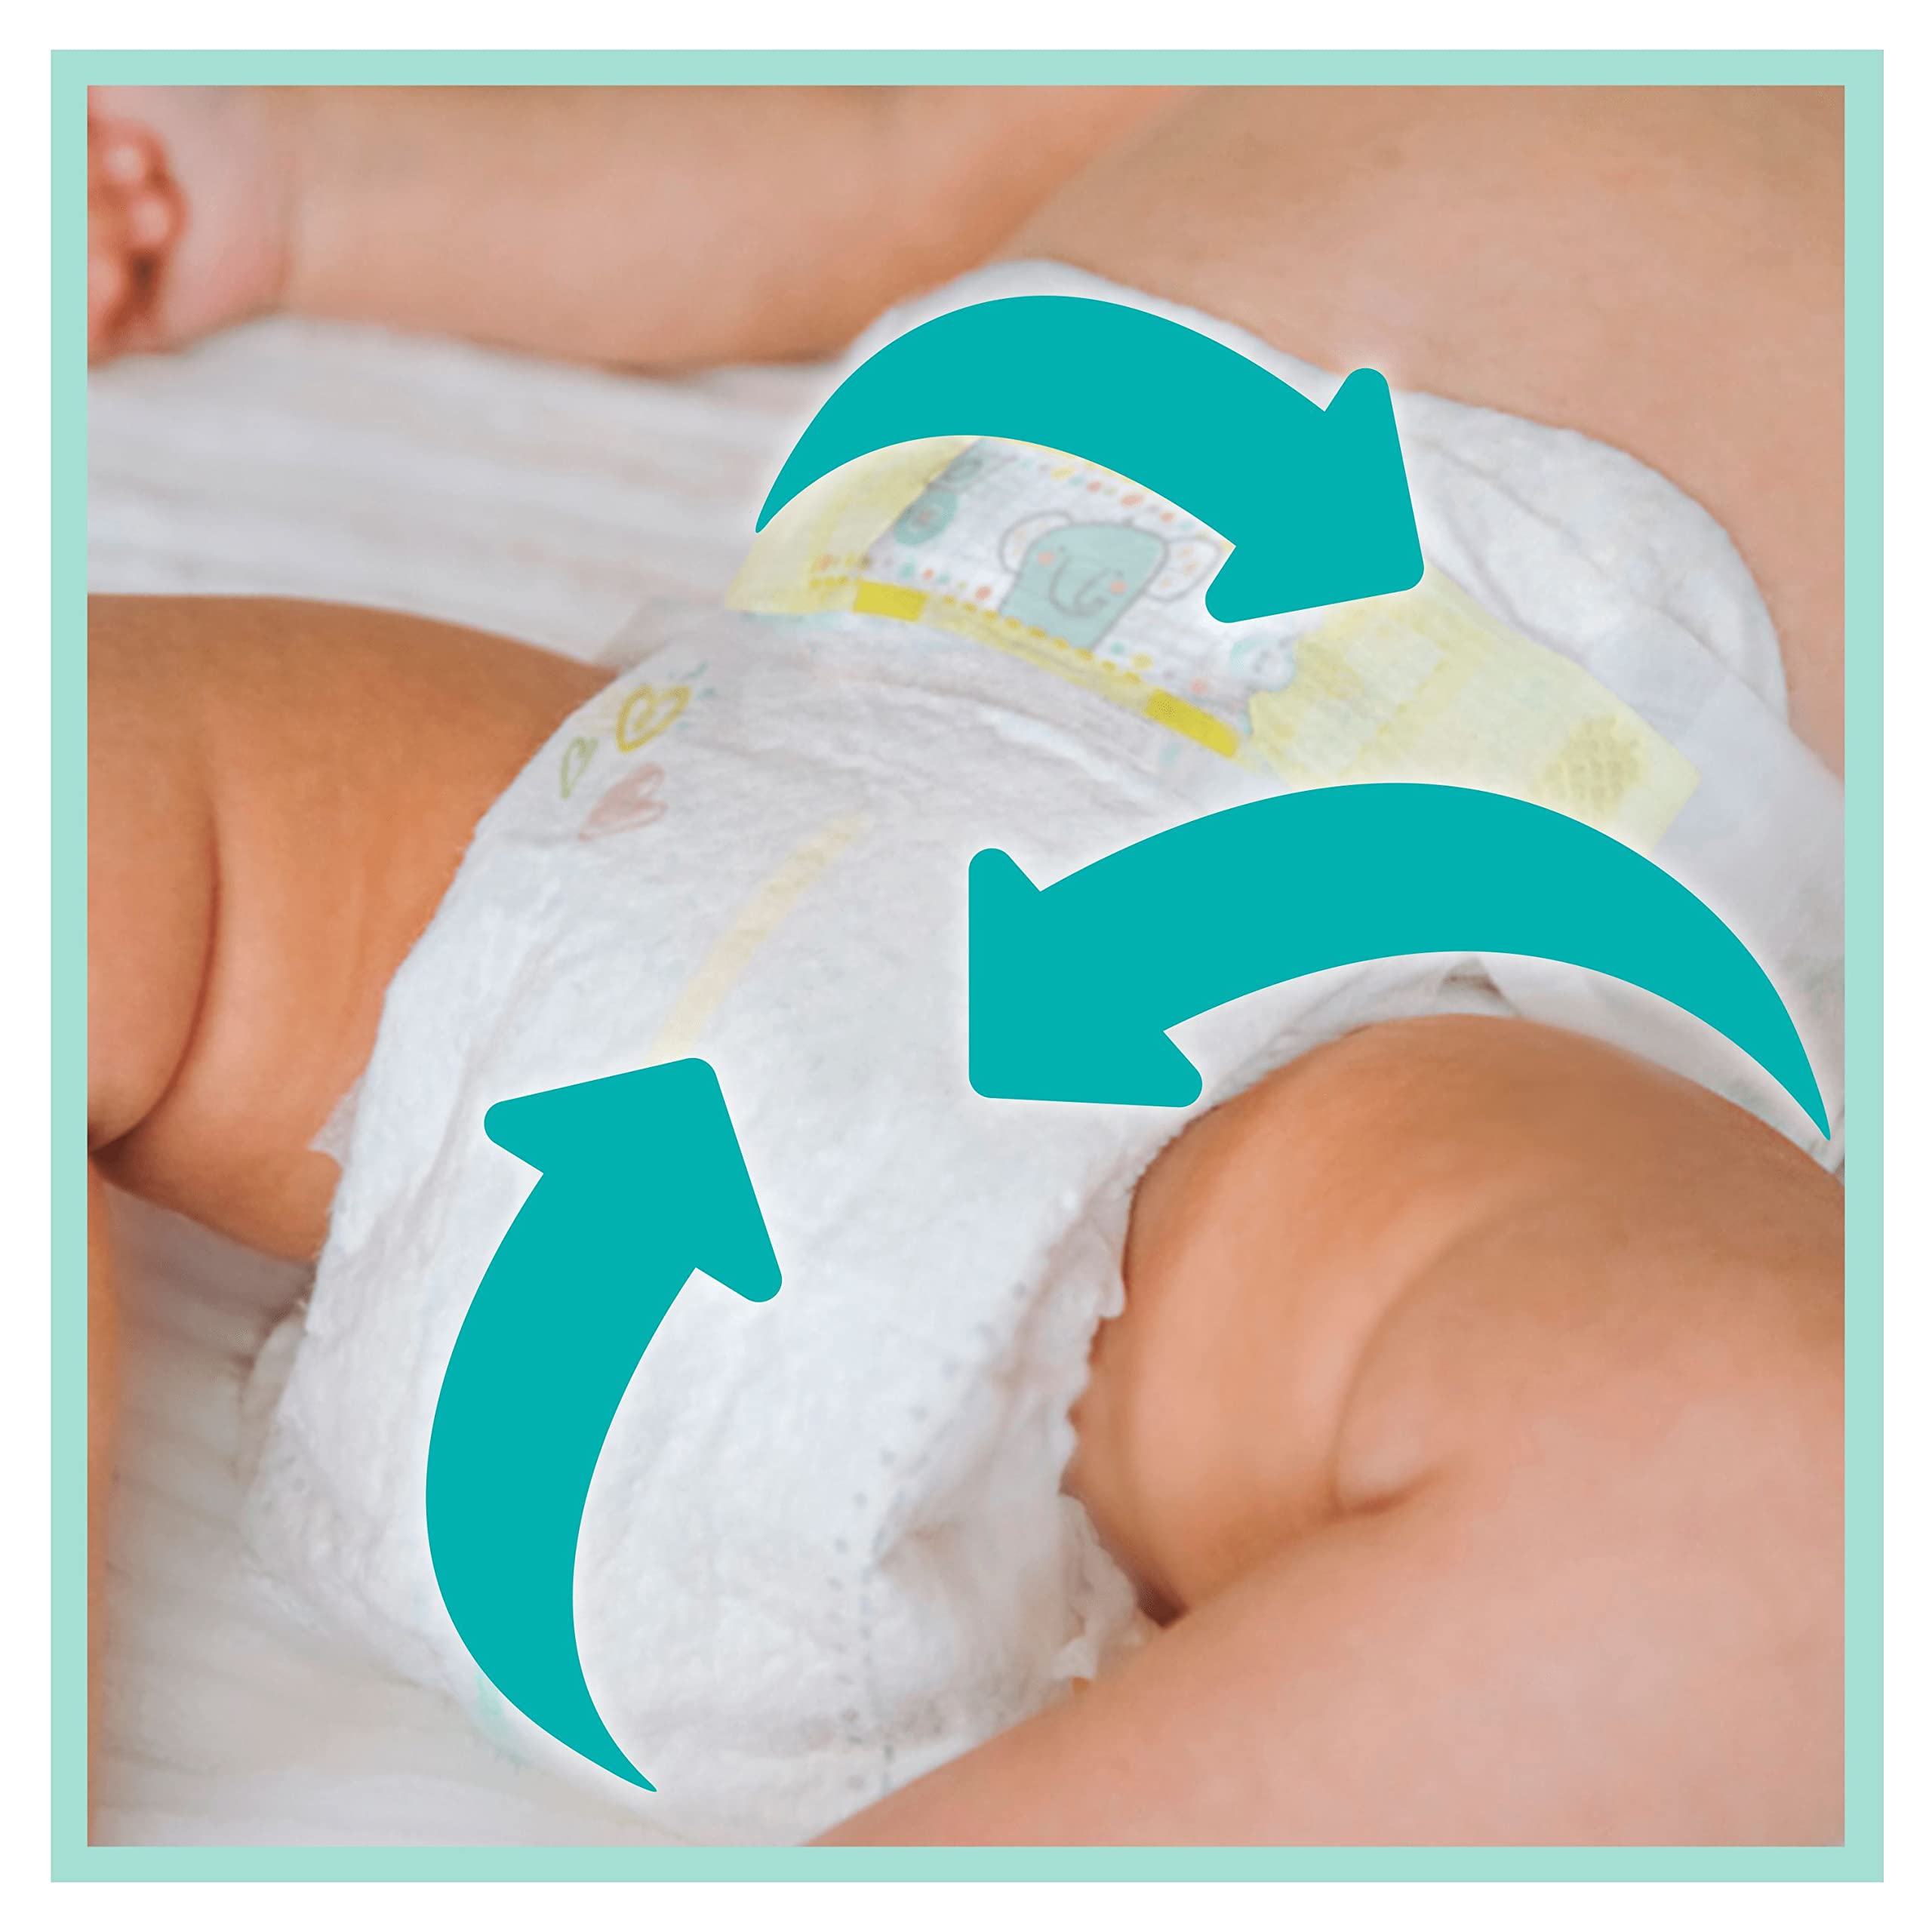 pampers taille 3